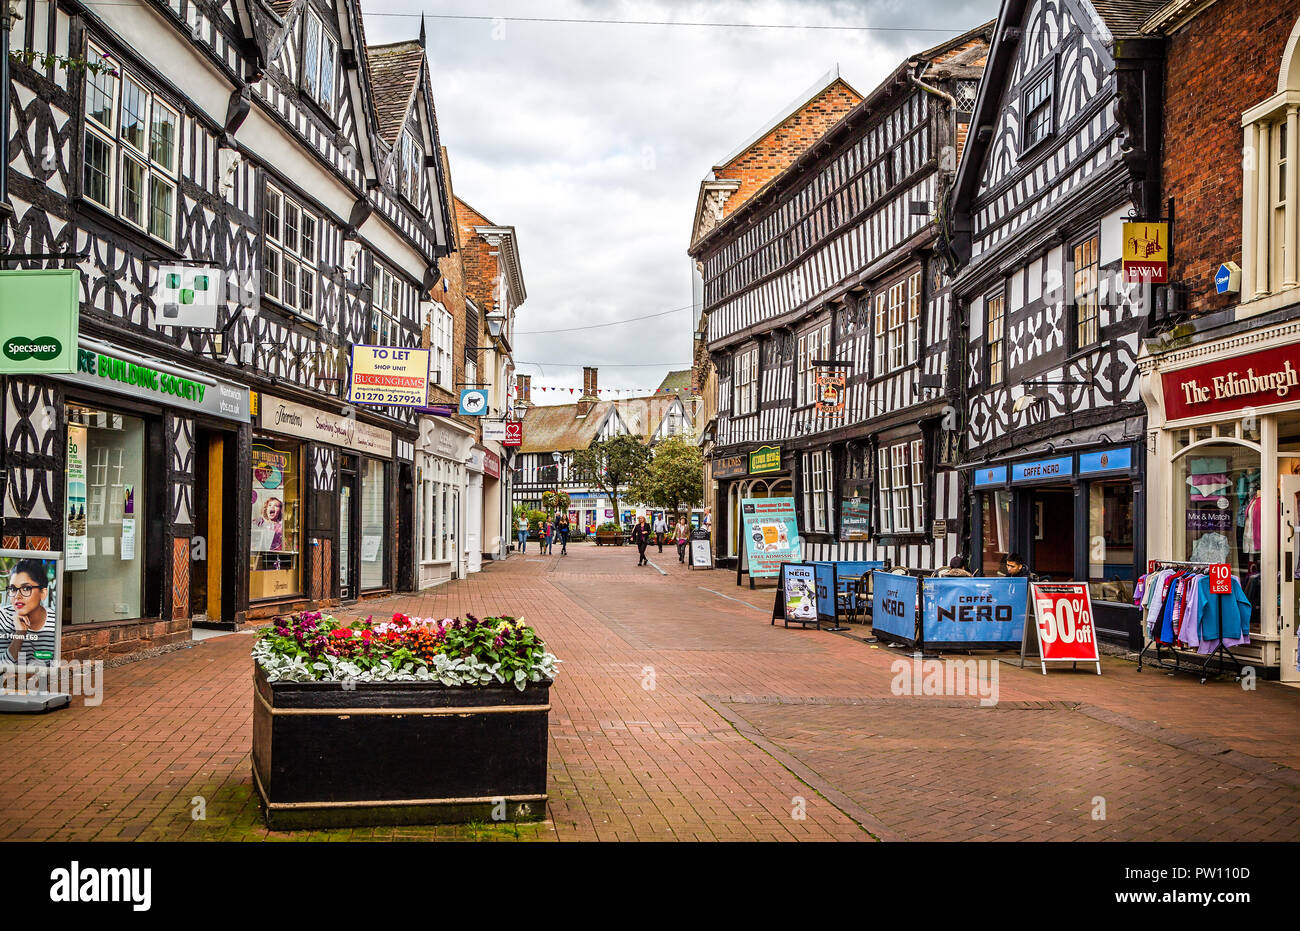 Half timbered Elizabethan buildings in High Street, Nantwich, Cheshire, UK taken on 1 September 2014 Stock Photo